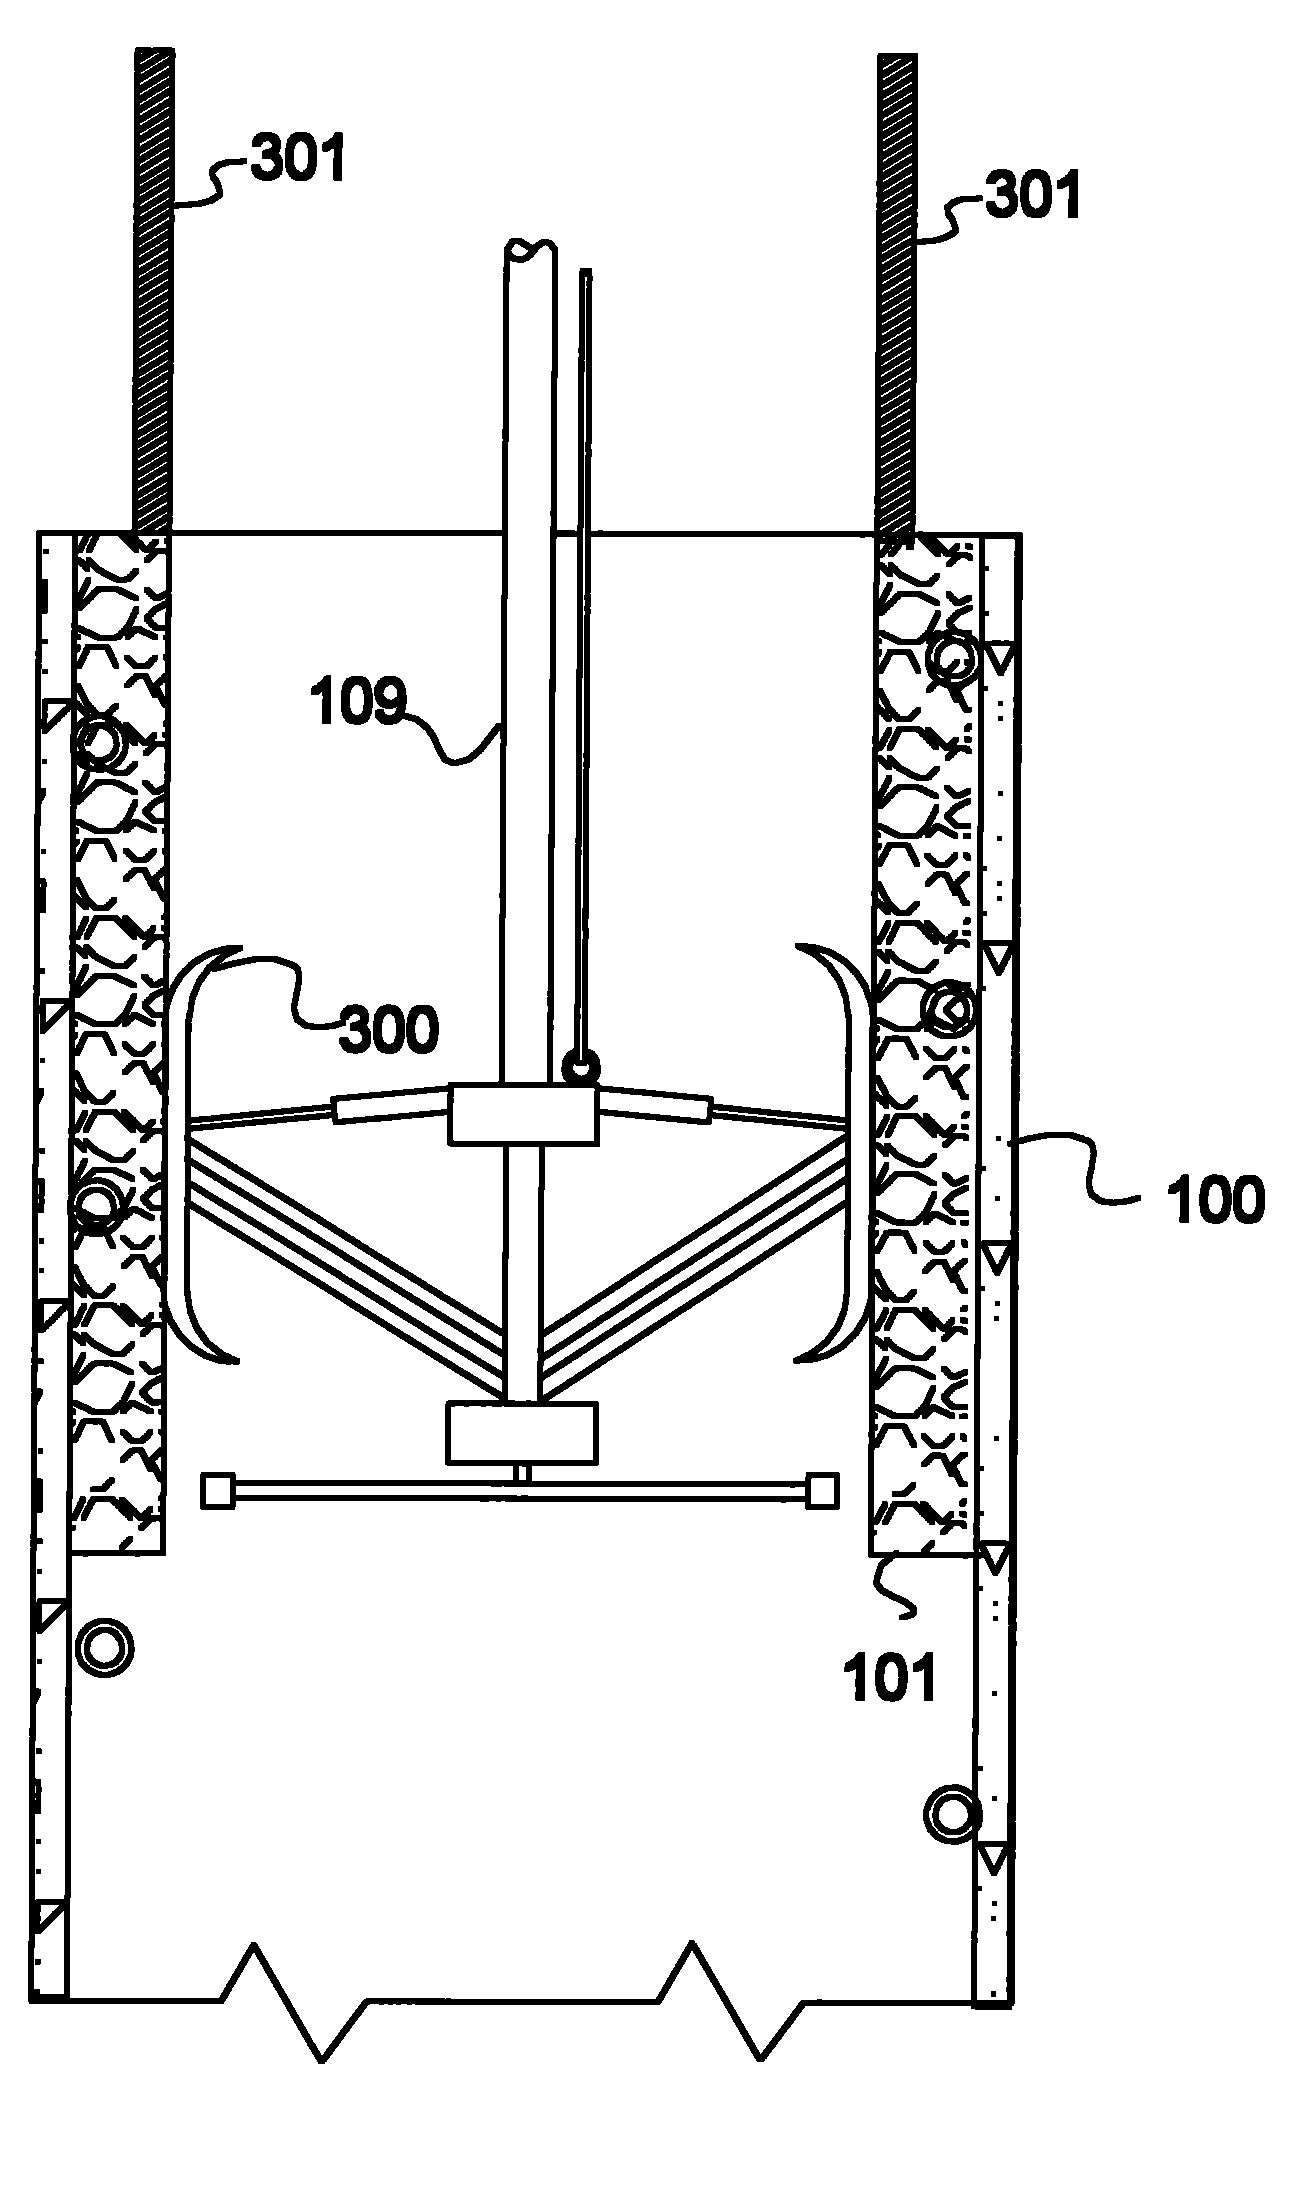 Refractory material removal system and method